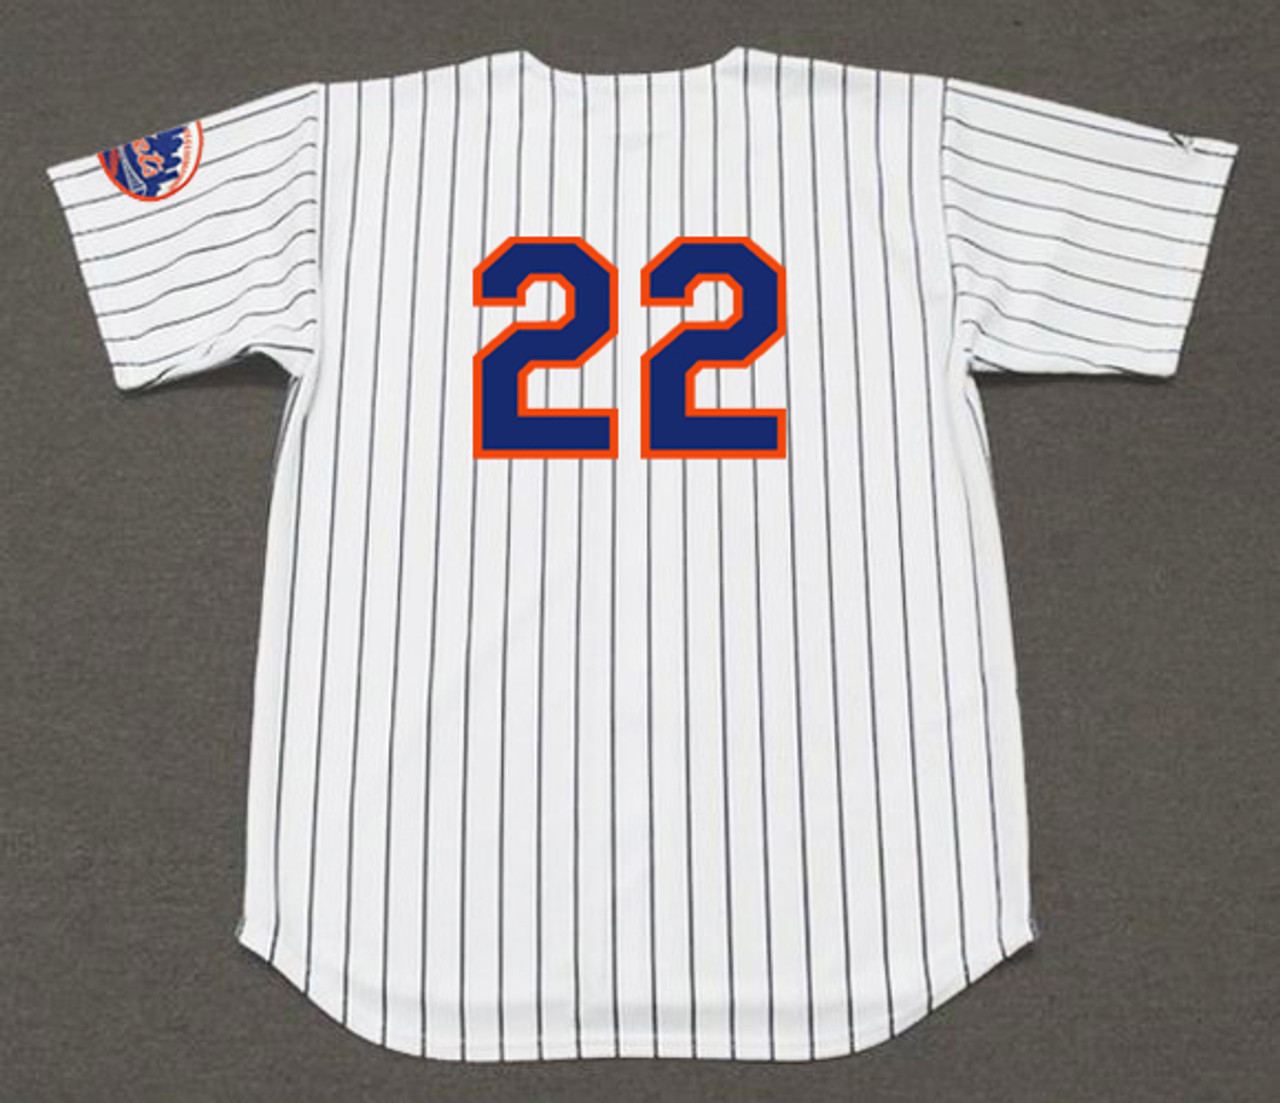 Mets to Wear, Auction Throwback Jerseys